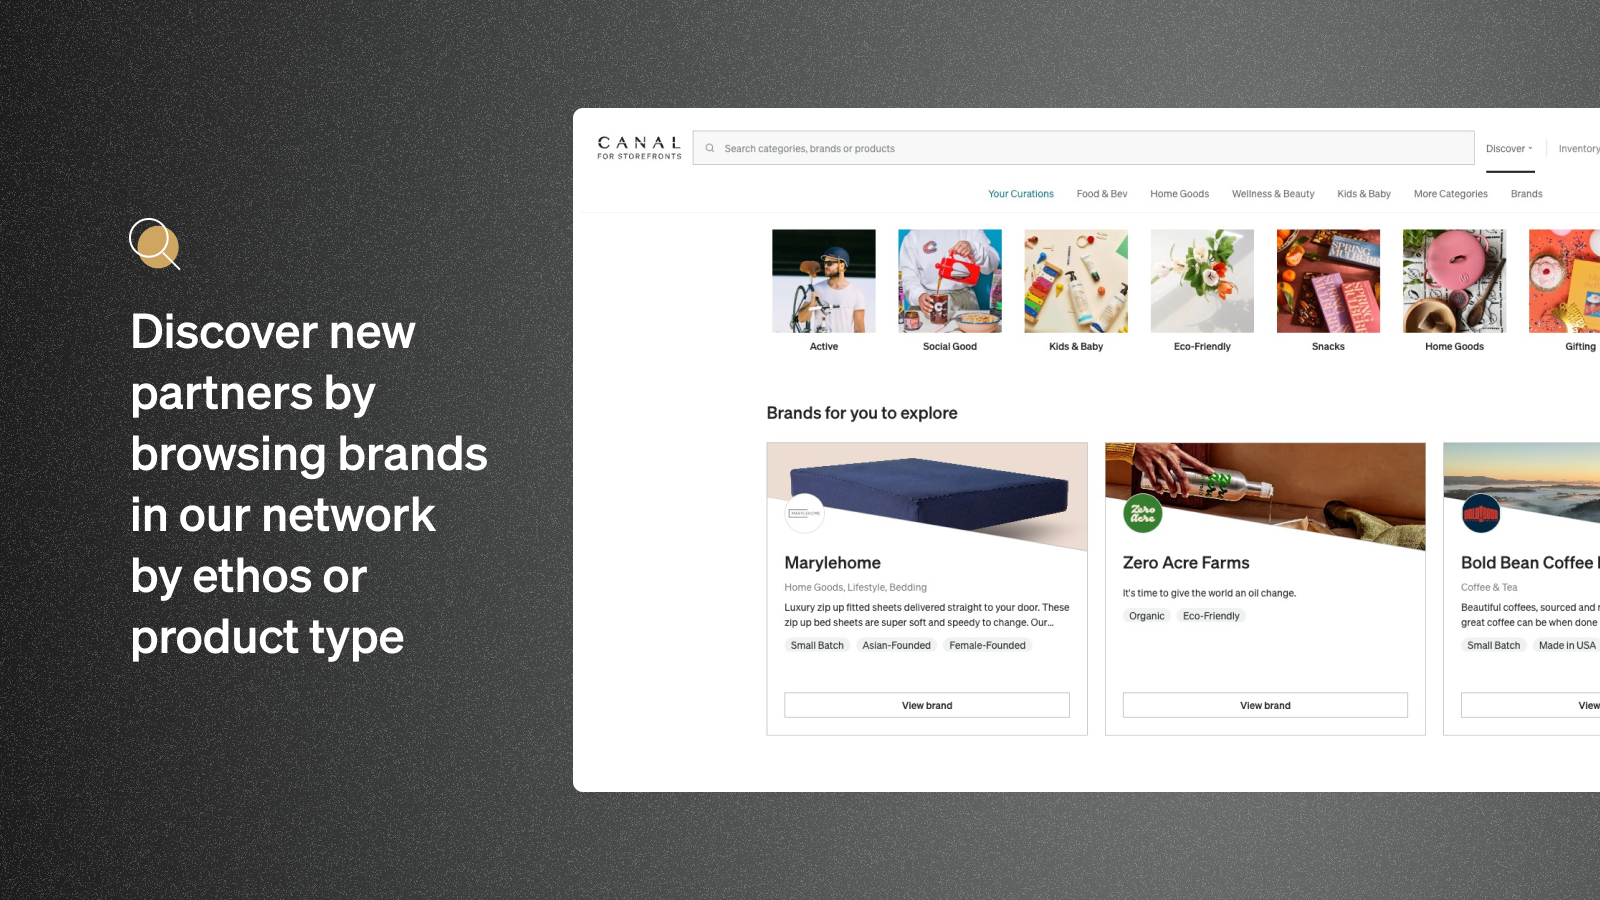 Discover new partners by browsing brands in our network